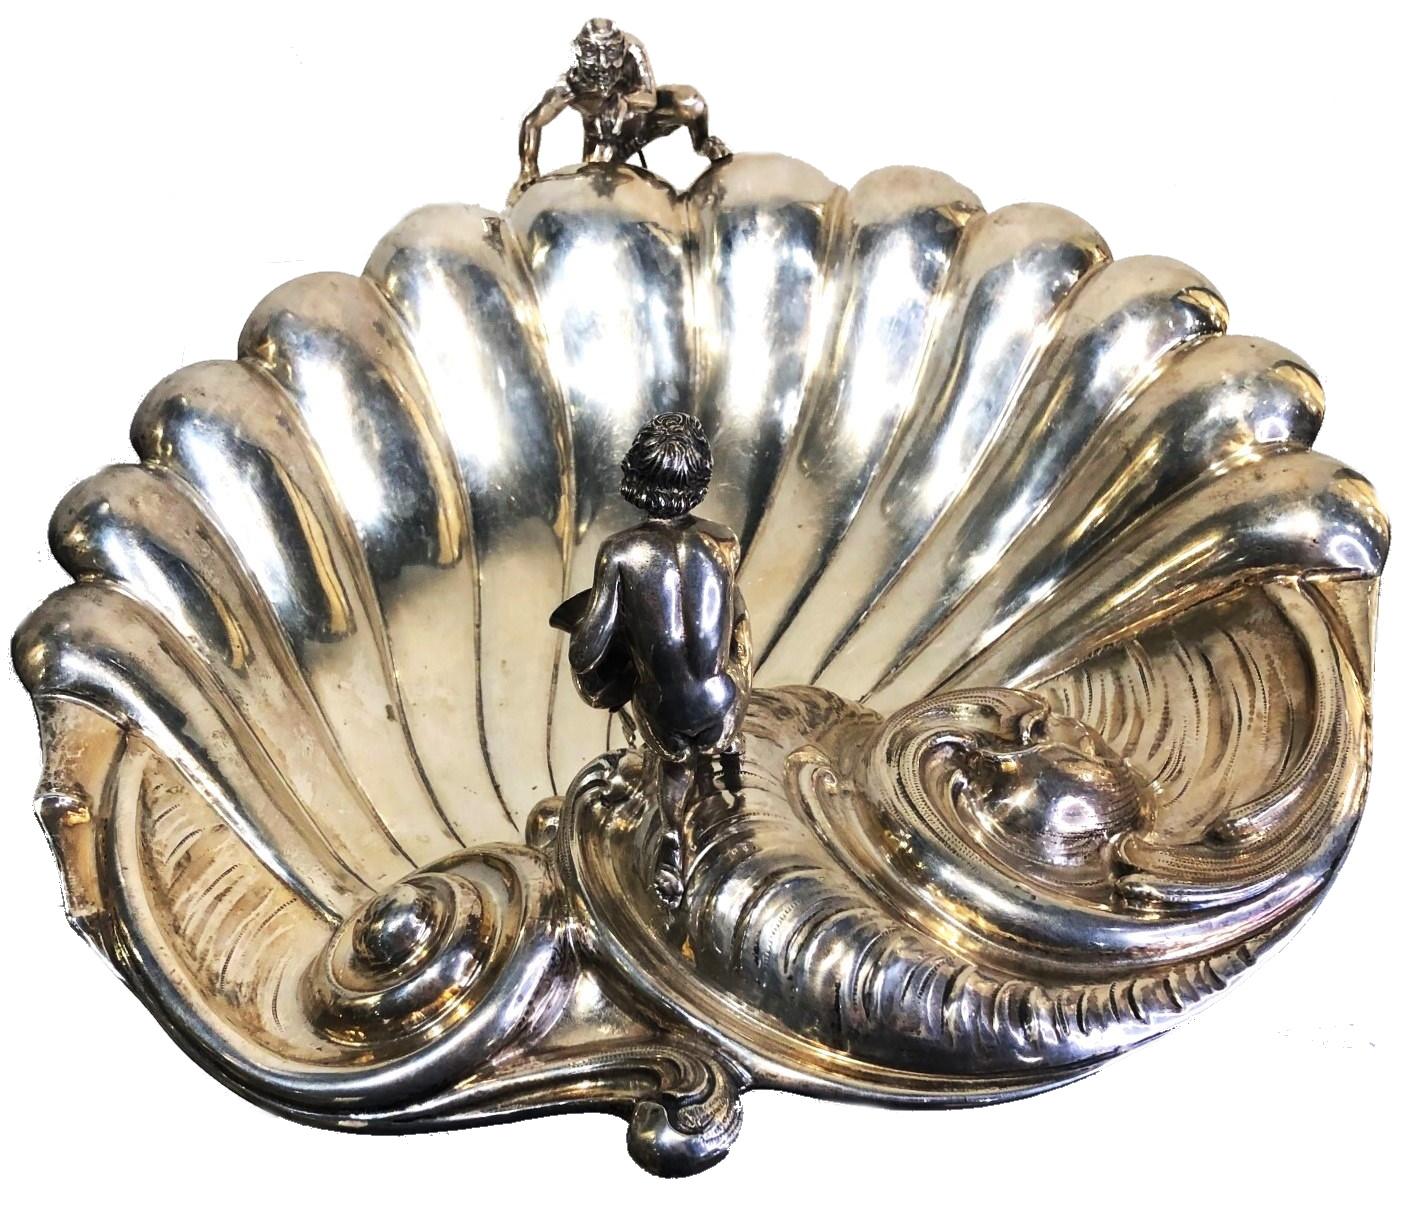 Rococo Revival
Antique Sculptural Centerpiece
800° Silver 
Italy, ca. 1880s

DIMENSIONS
Height: 7.75 inches            Width: 18.25 inches           Depth: 16.75 inches

WEIGHT
88oz (2,766g)

MARKINGS
Marked ‘800’ and two maker’s hallmarks